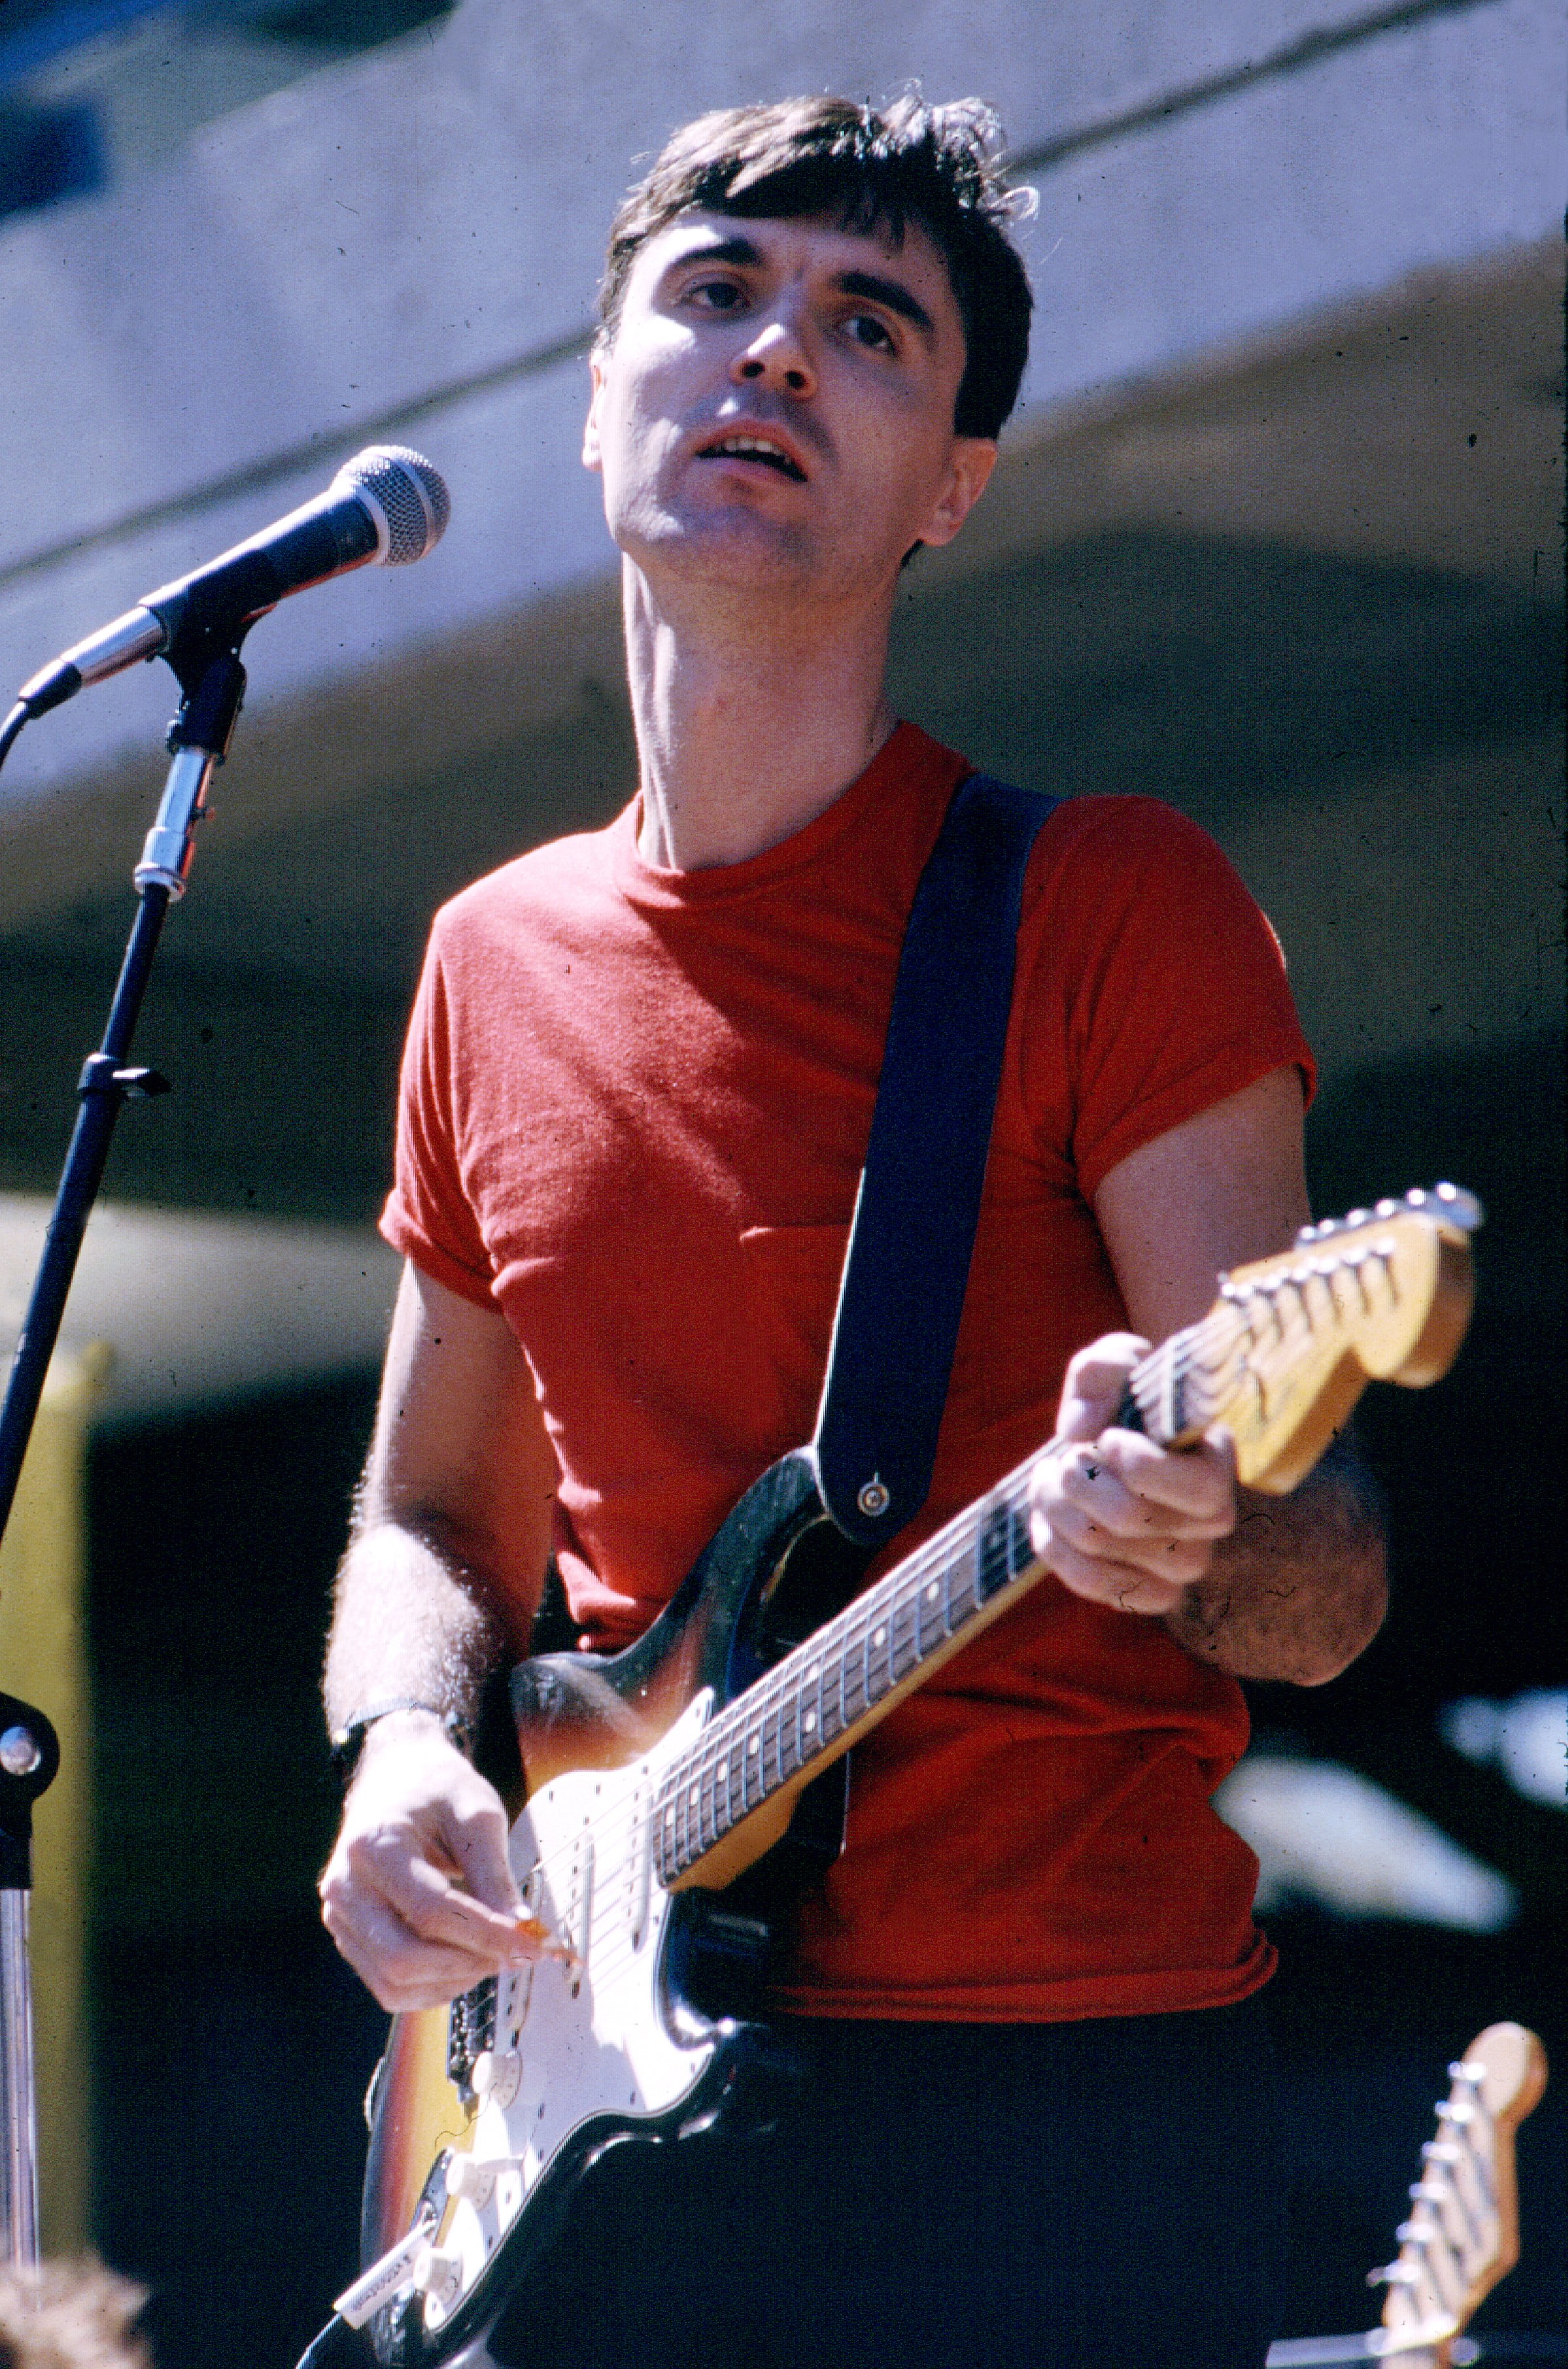 David Byrne performing with the Talking Heads circa 1980